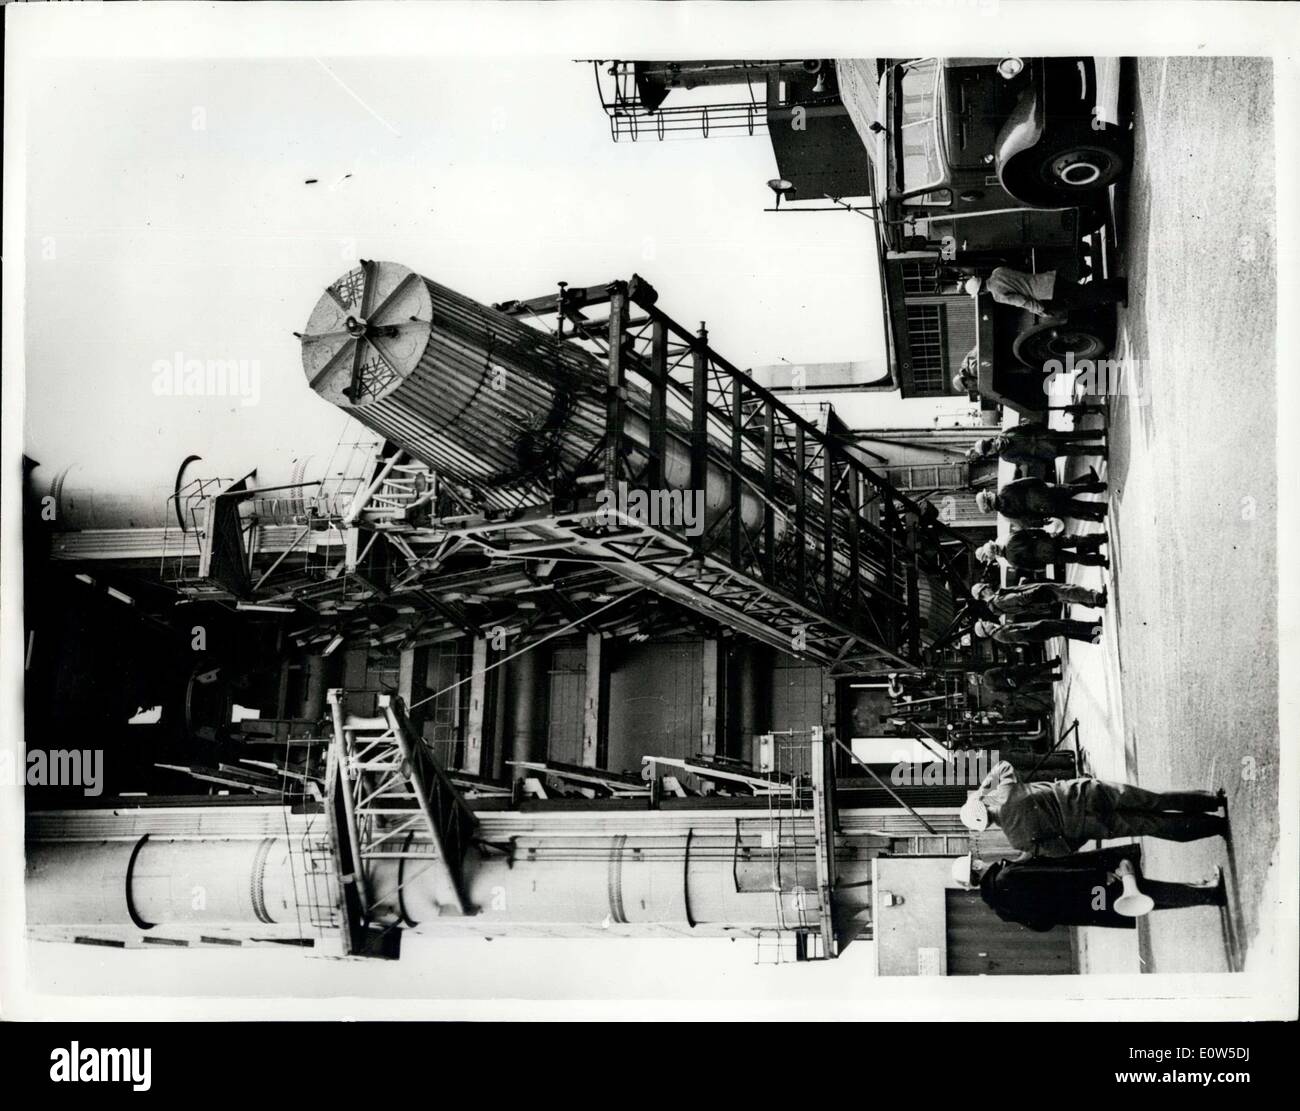 Jul. 06, 1961 - West Germany, France and Britain to work together on Satellite - launching rocket: West Germany has replied favourably to the British and French proposals that Europe should set up and organisation to develop and produce rockets to launch satellites into space for peaceful purposes. Blue Streak would be the basis of the first program to be undertaken by an European satellite launcher organization Stock Photo